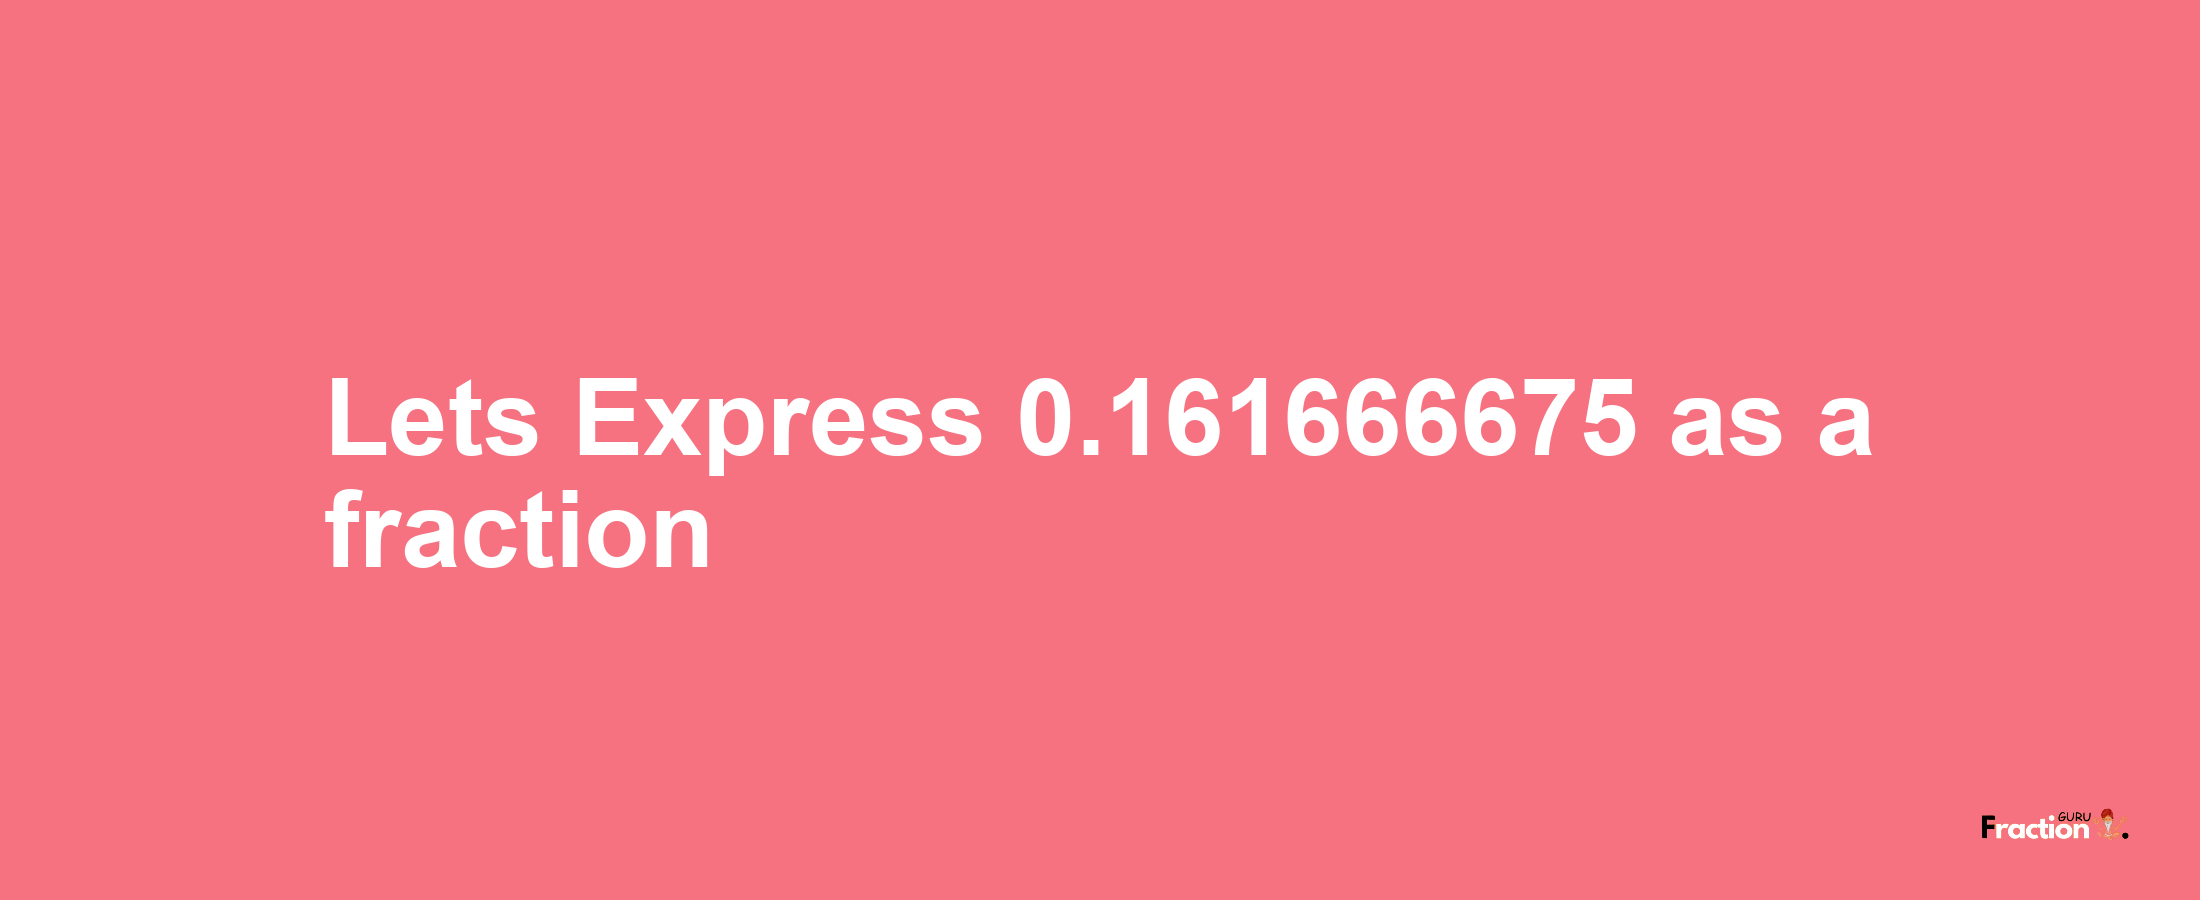 Lets Express 0.161666675 as afraction